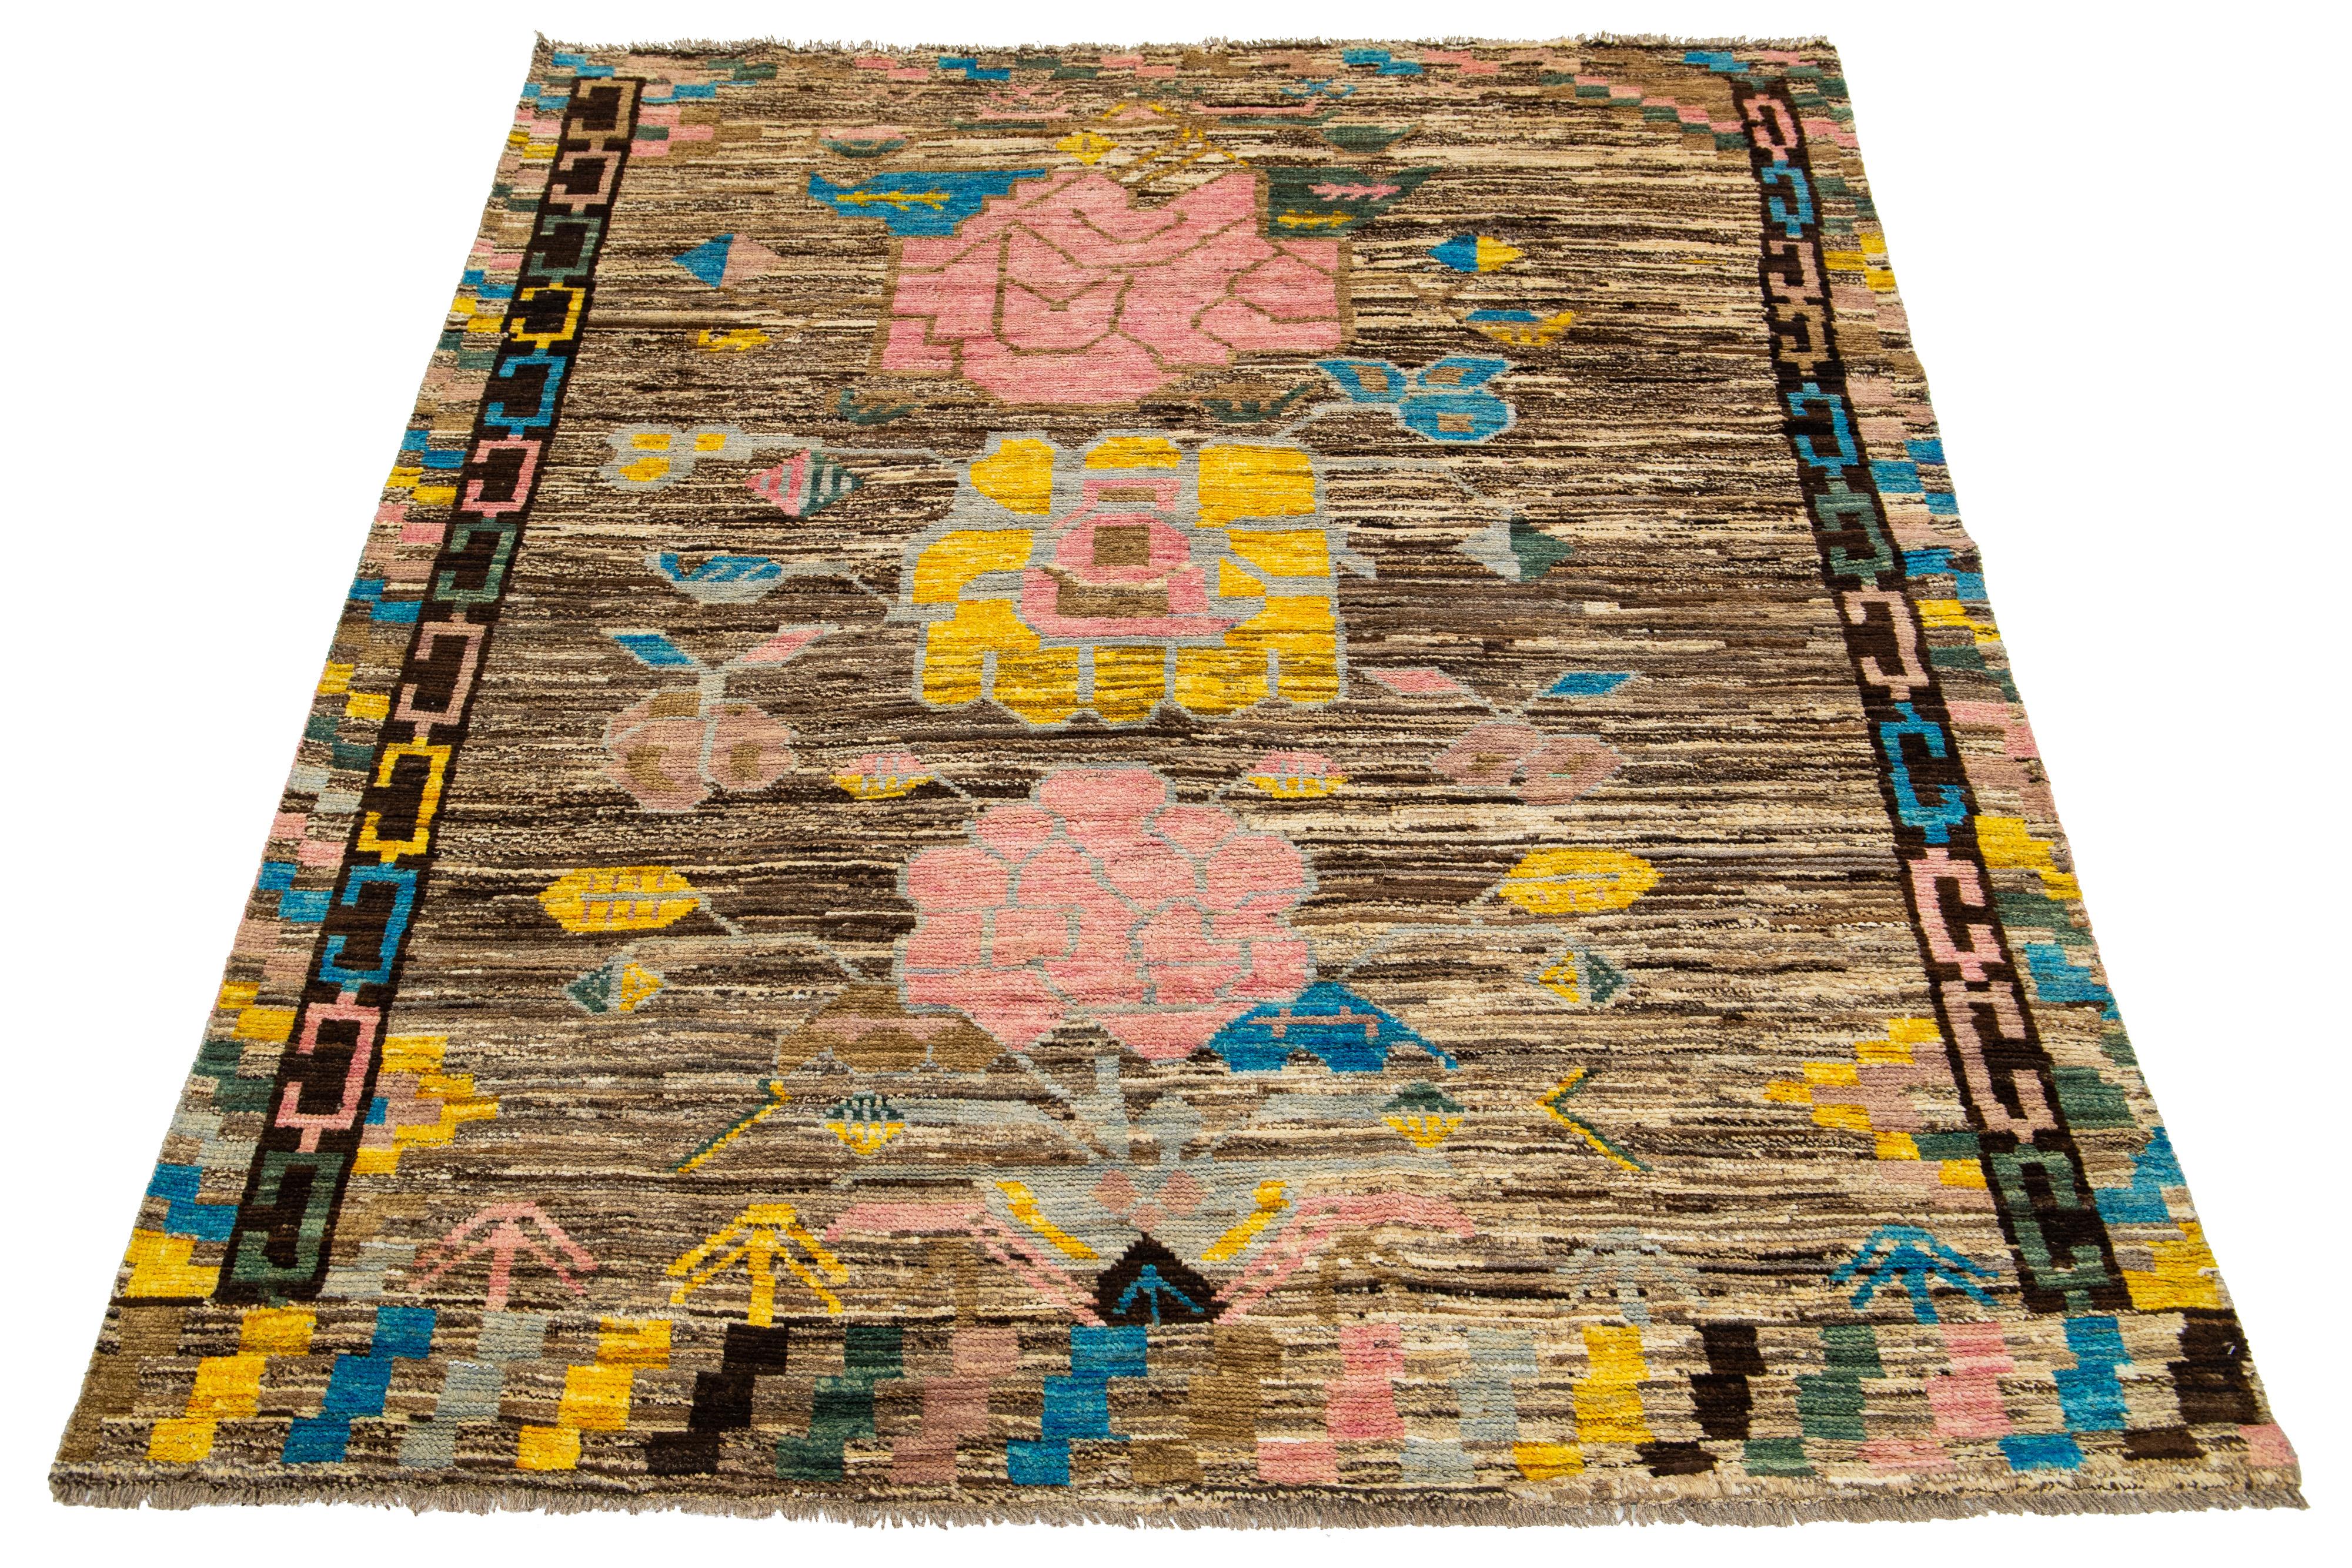 This contemporary Moroccan-style wool rug features a captivating brown field with peach, blue, and yellow flowers crafted in an all-over pattern.

This rug measures 5'10